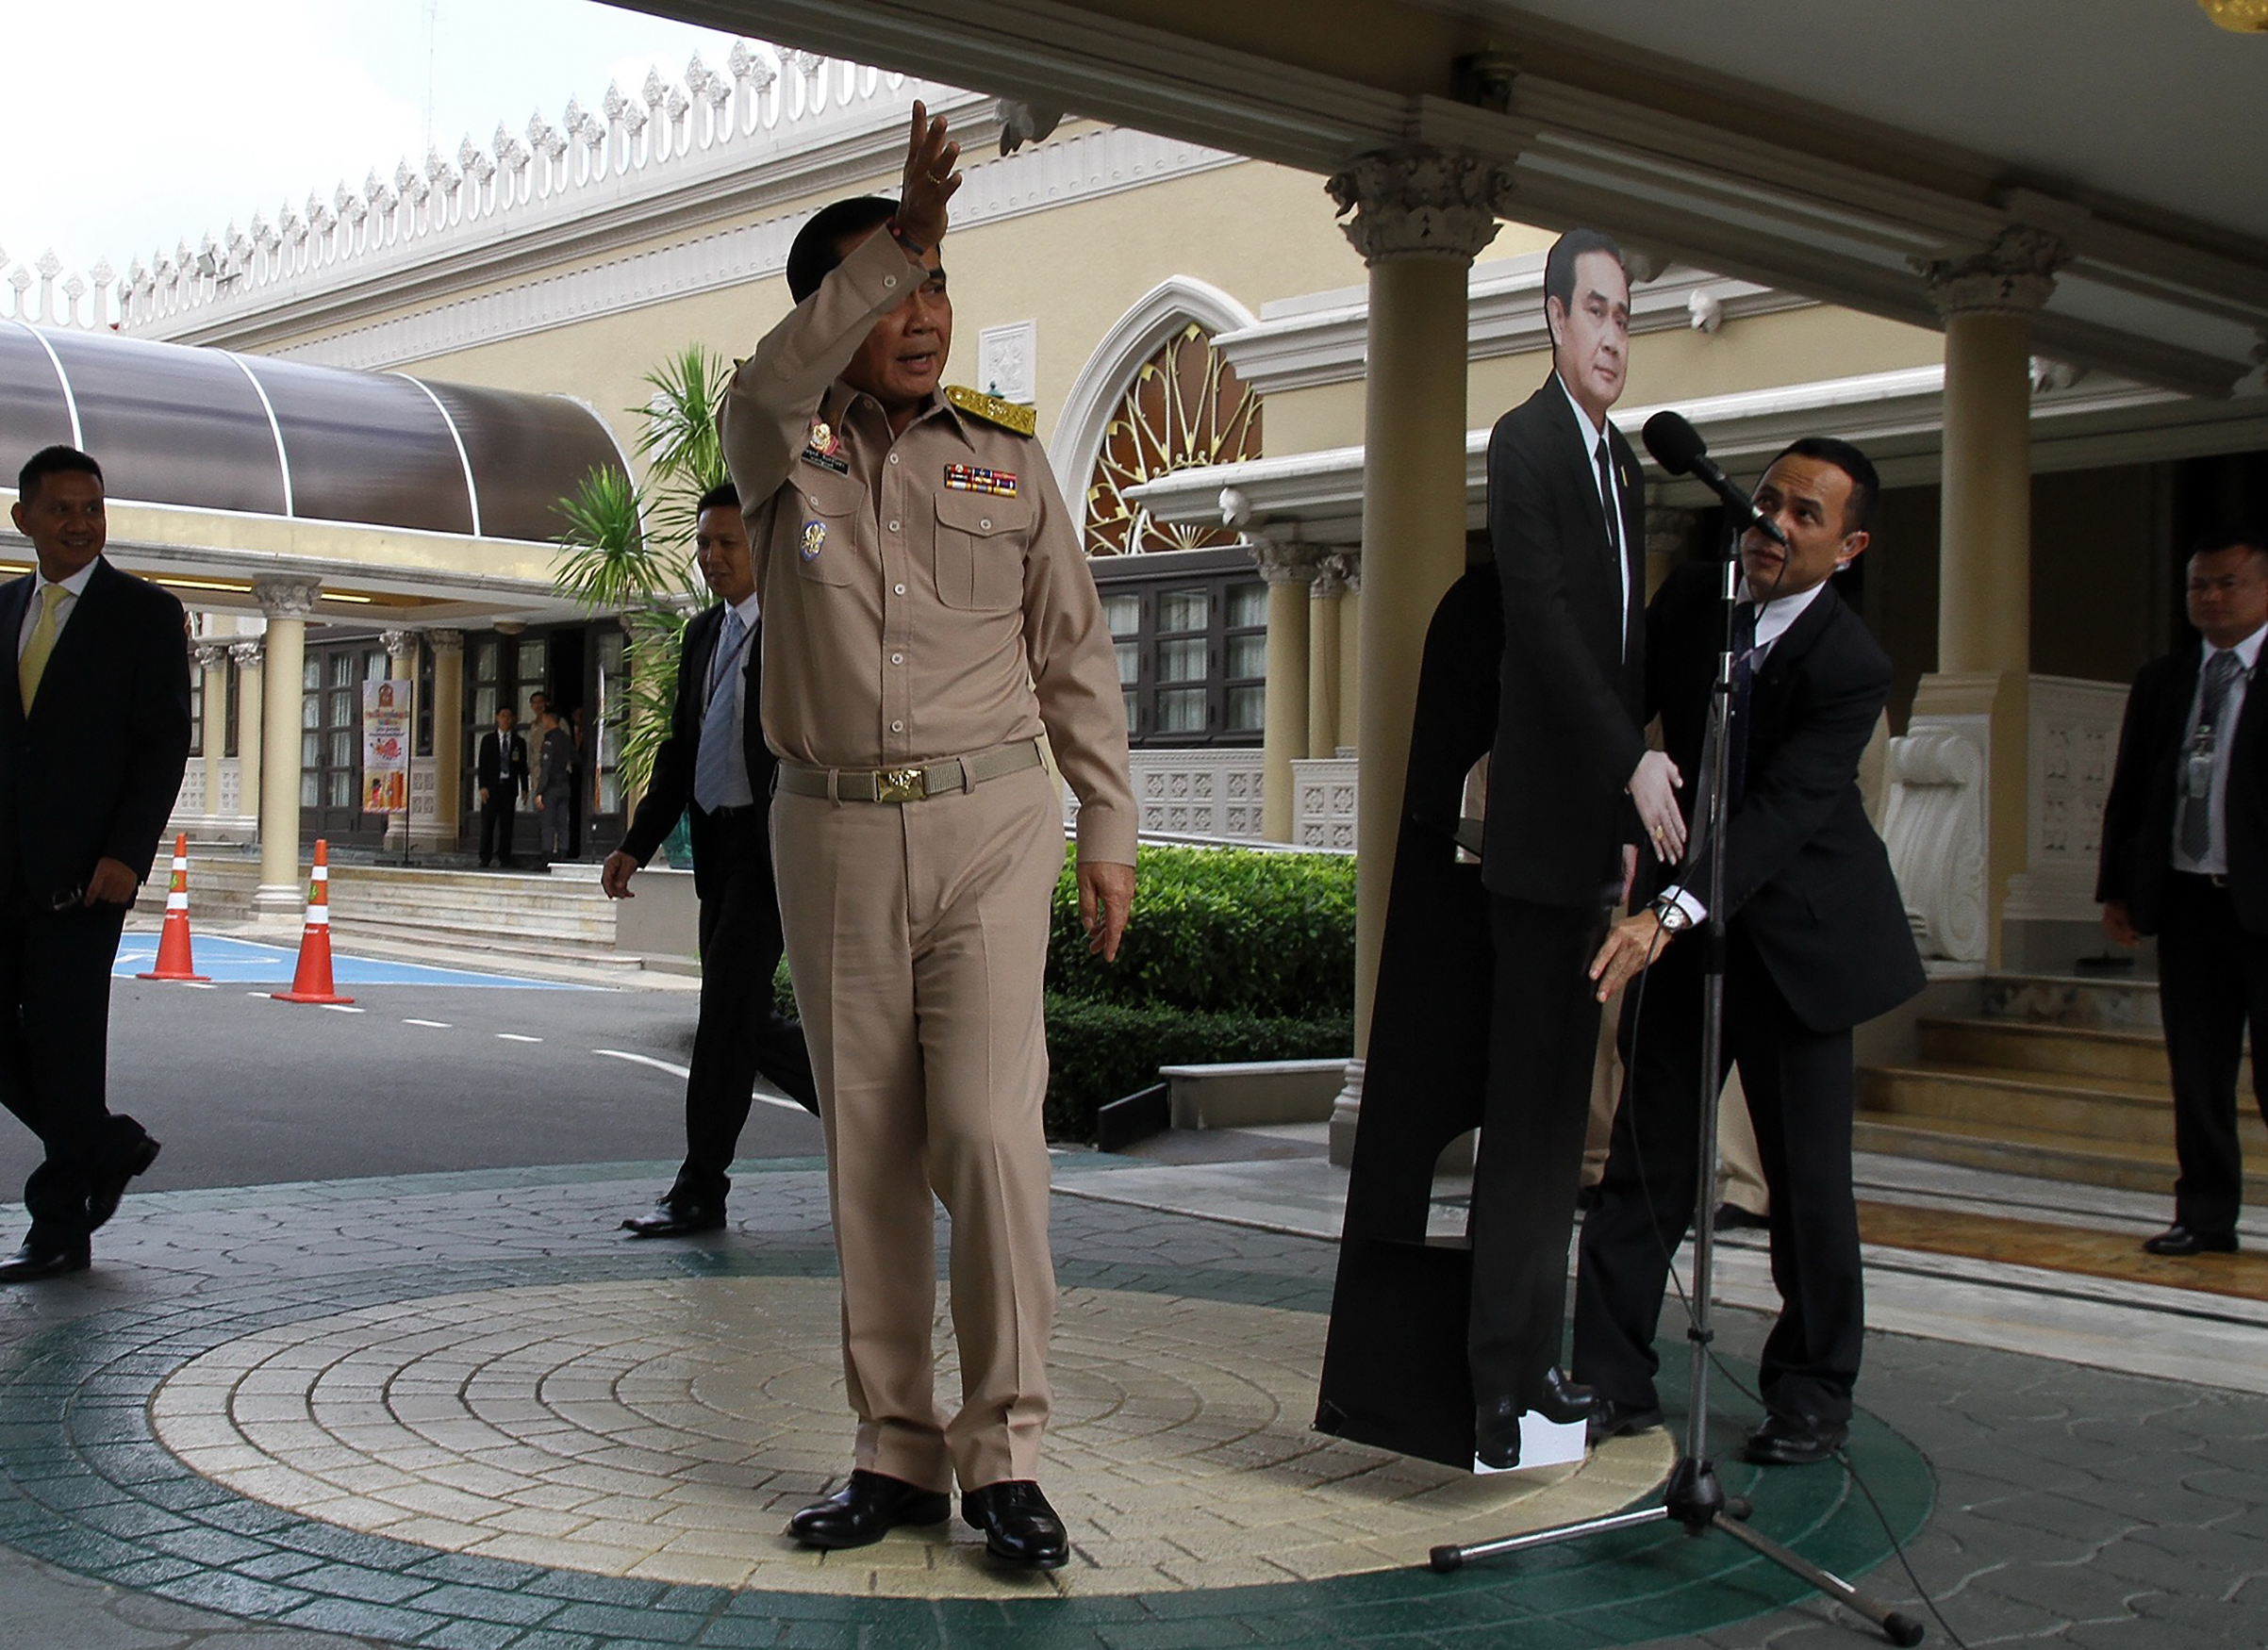 The Thai leader leaves a Jan. 8 press conference, telling reporters to direct questions to a cardboard cutout (Daily News/AFP/Getty Images)